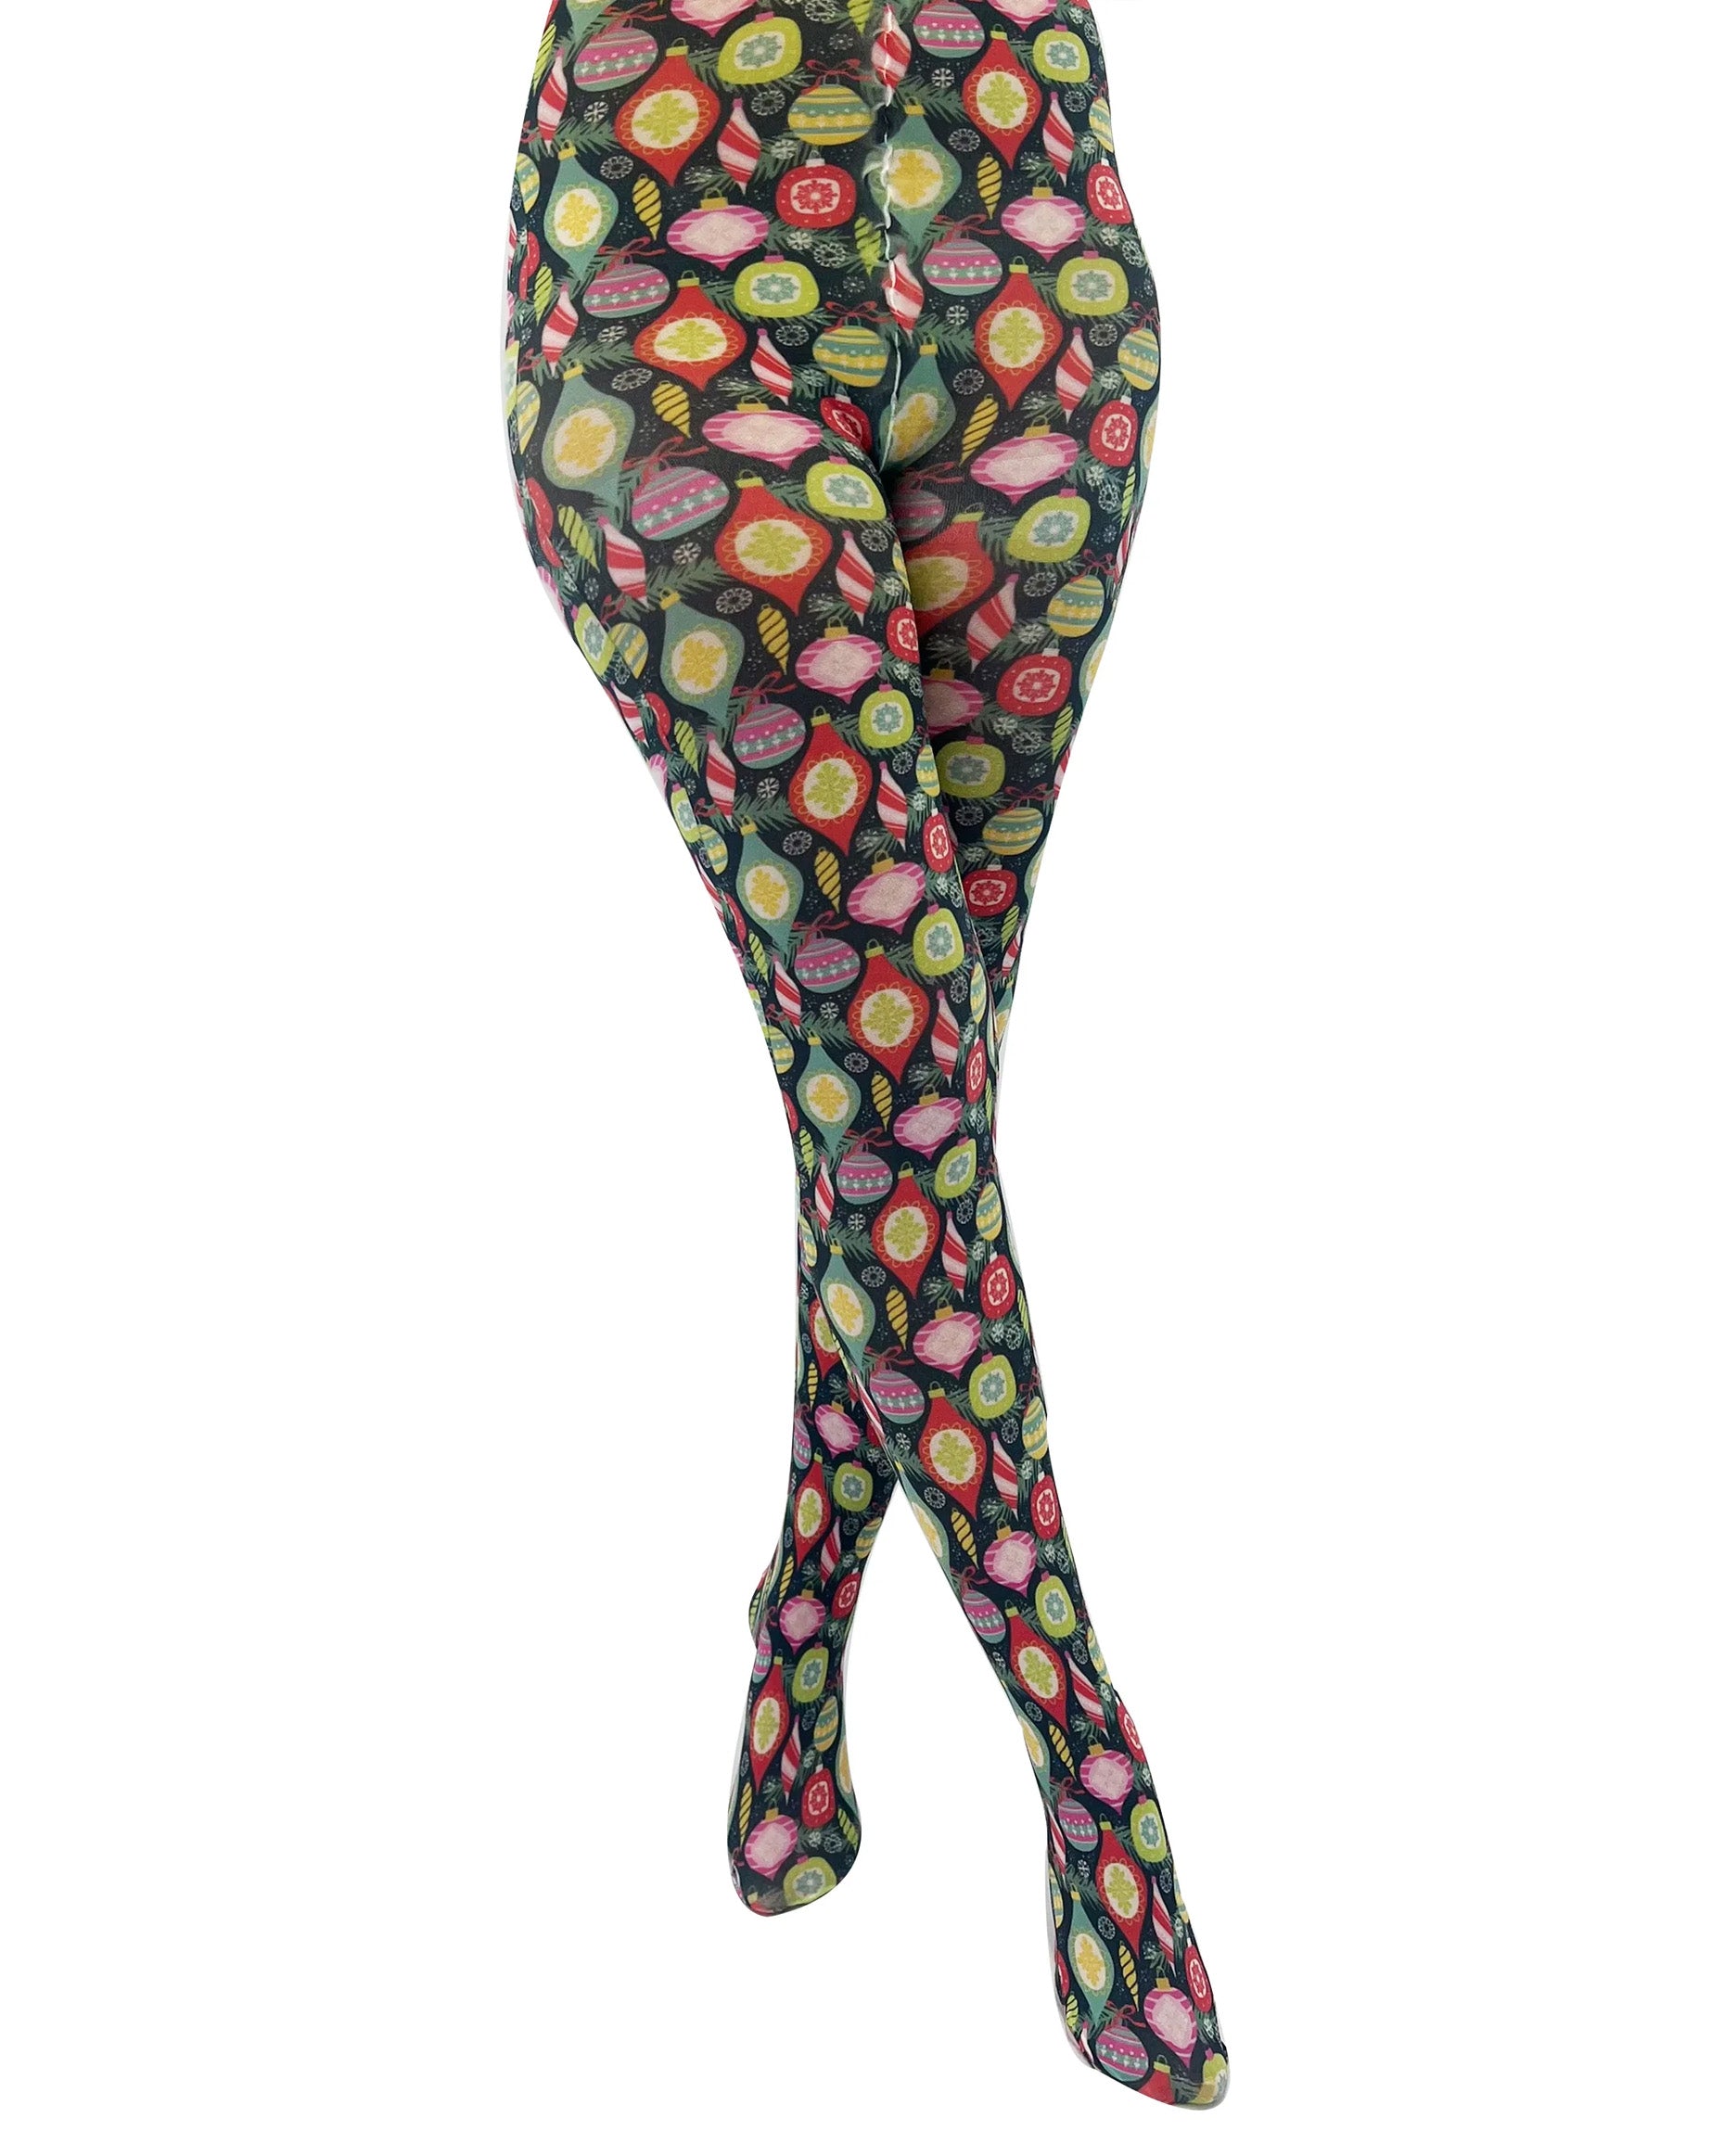 Pamela Mann Christmas Bauble Printed Tights - Xmas themed printed tights of multicoloured bauble tree decorations on a black background.